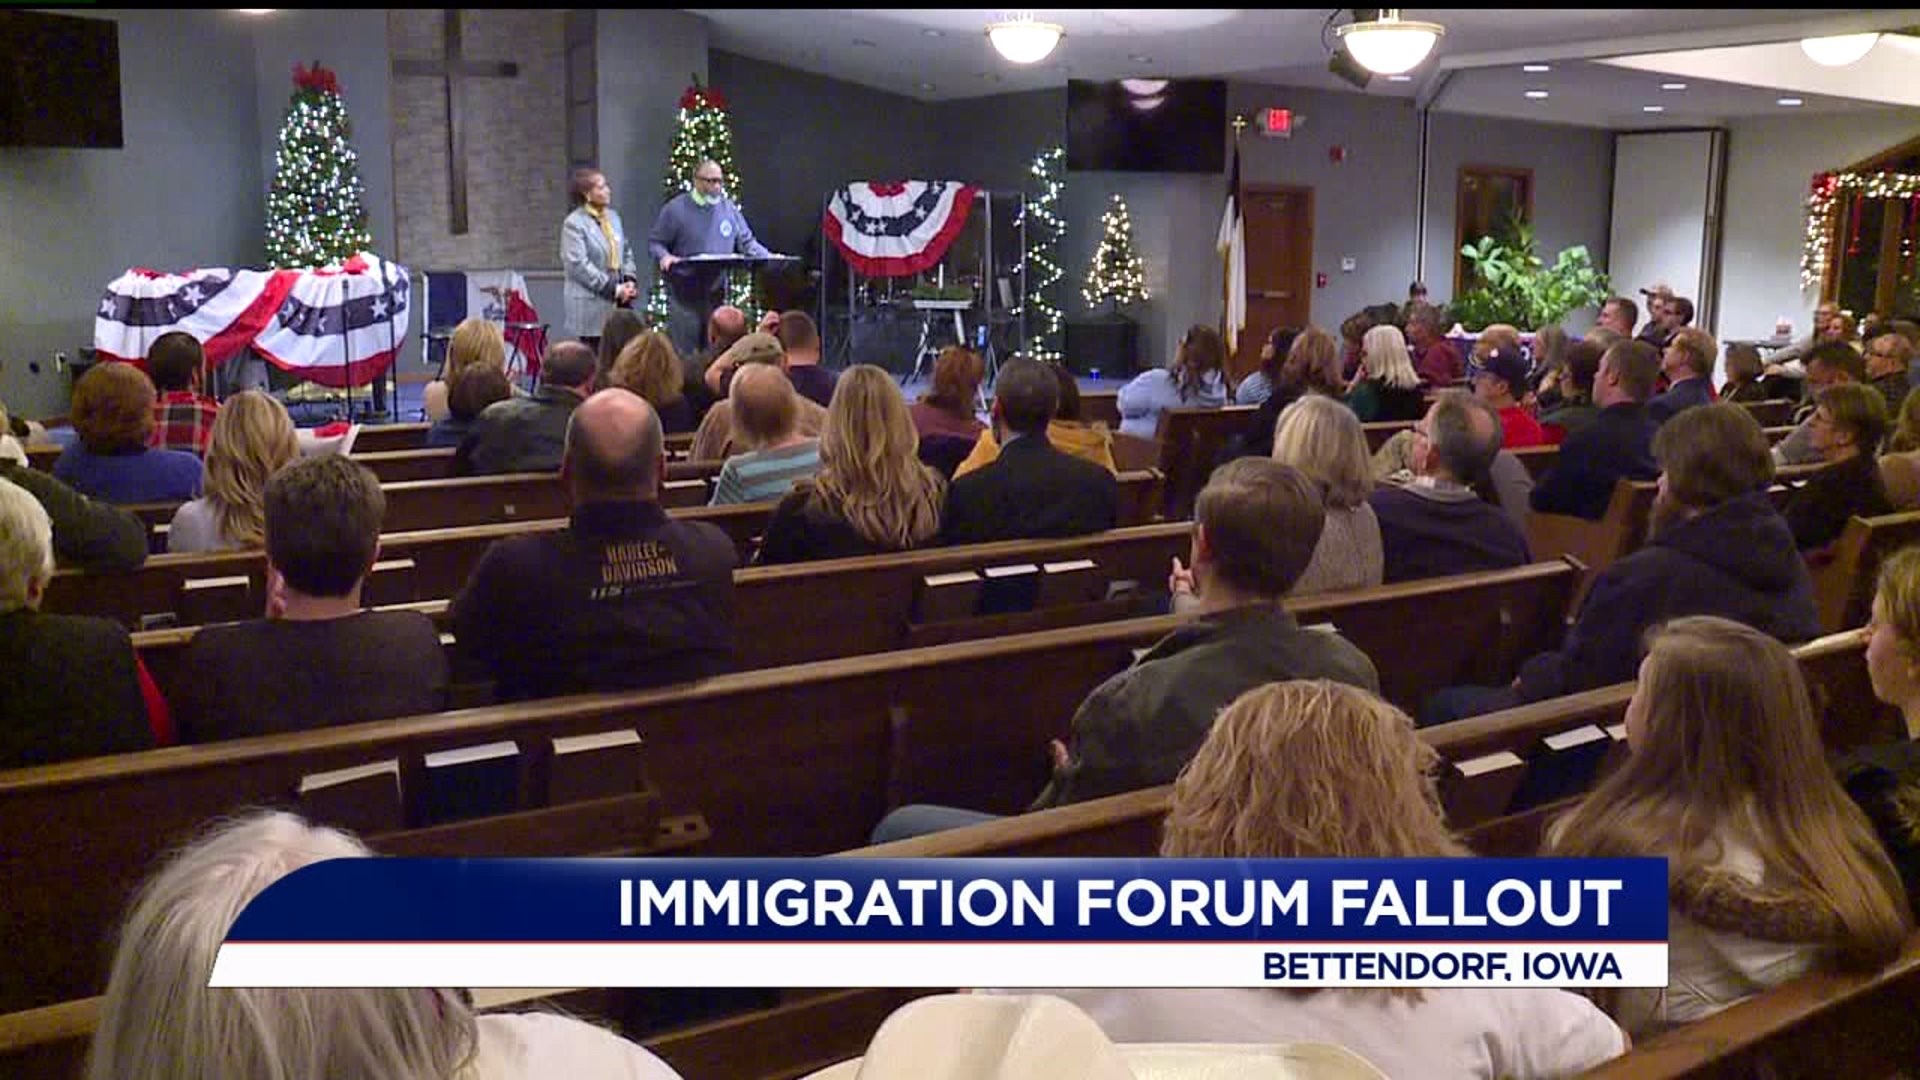 Staff fired, protest planned following Bettendorf immigration forum